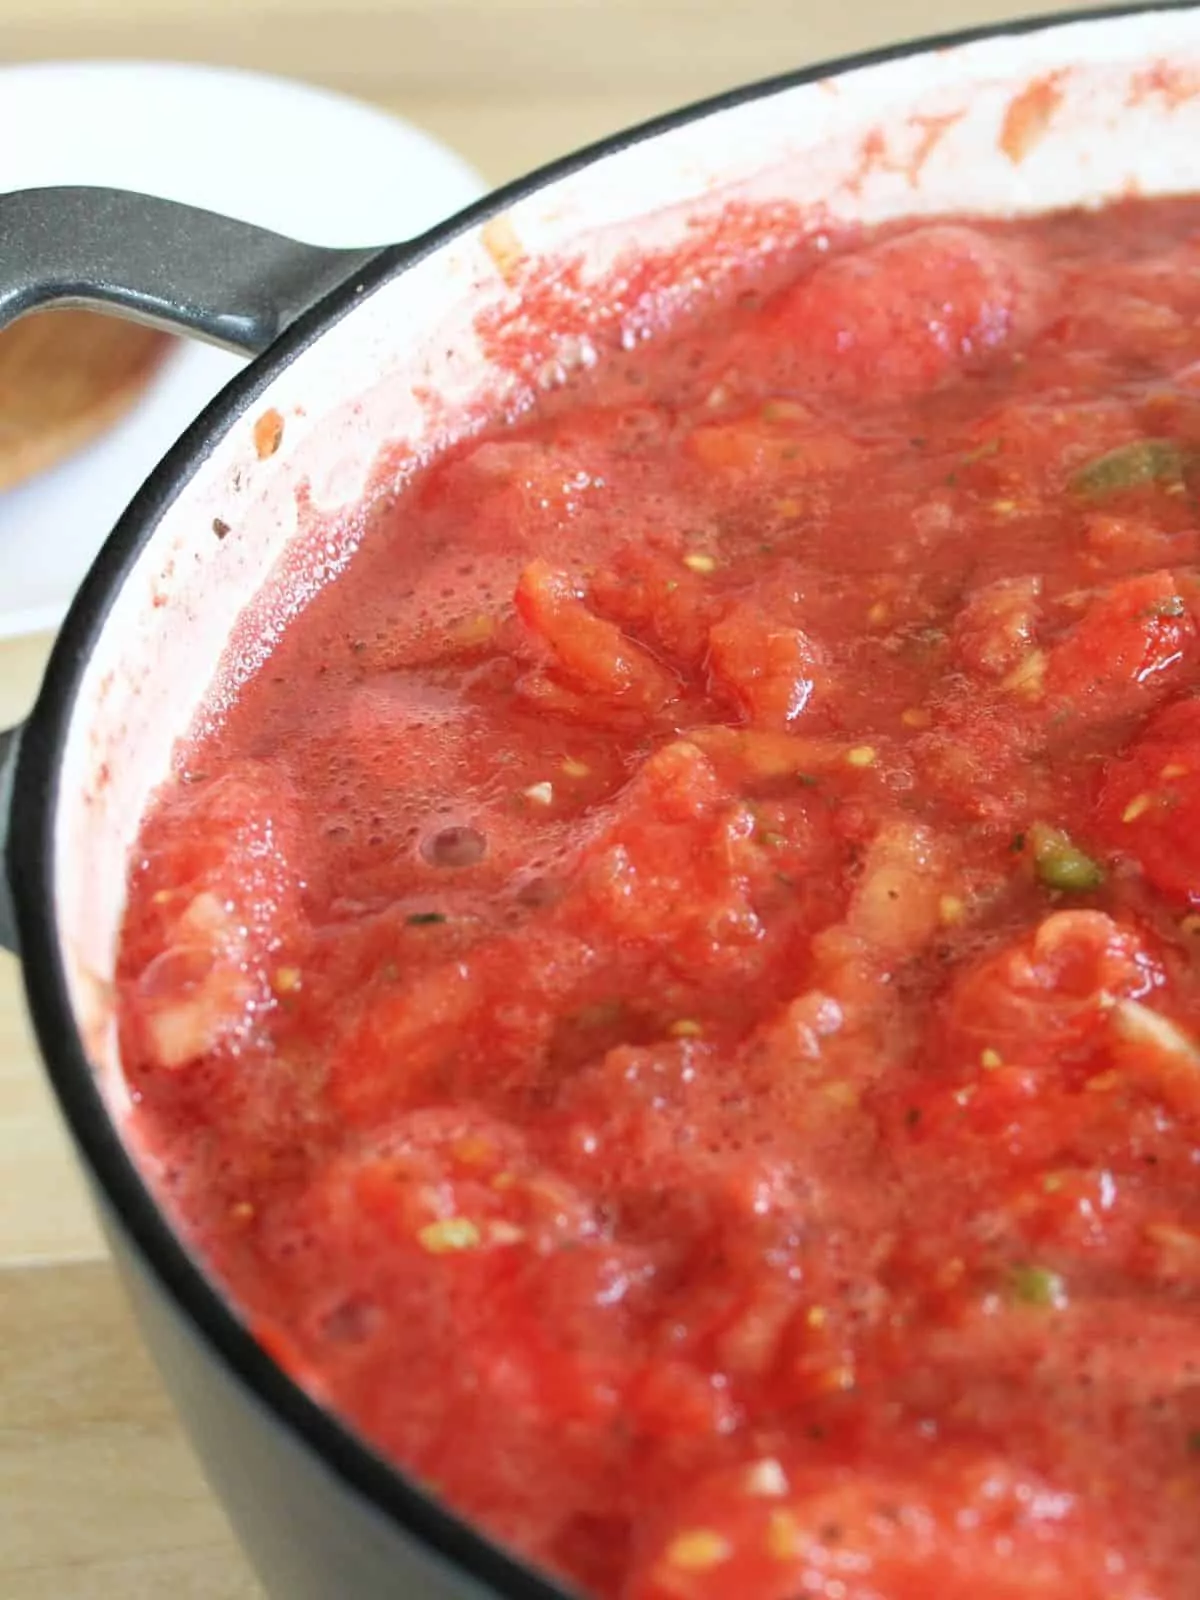 cooked tomato sauce.